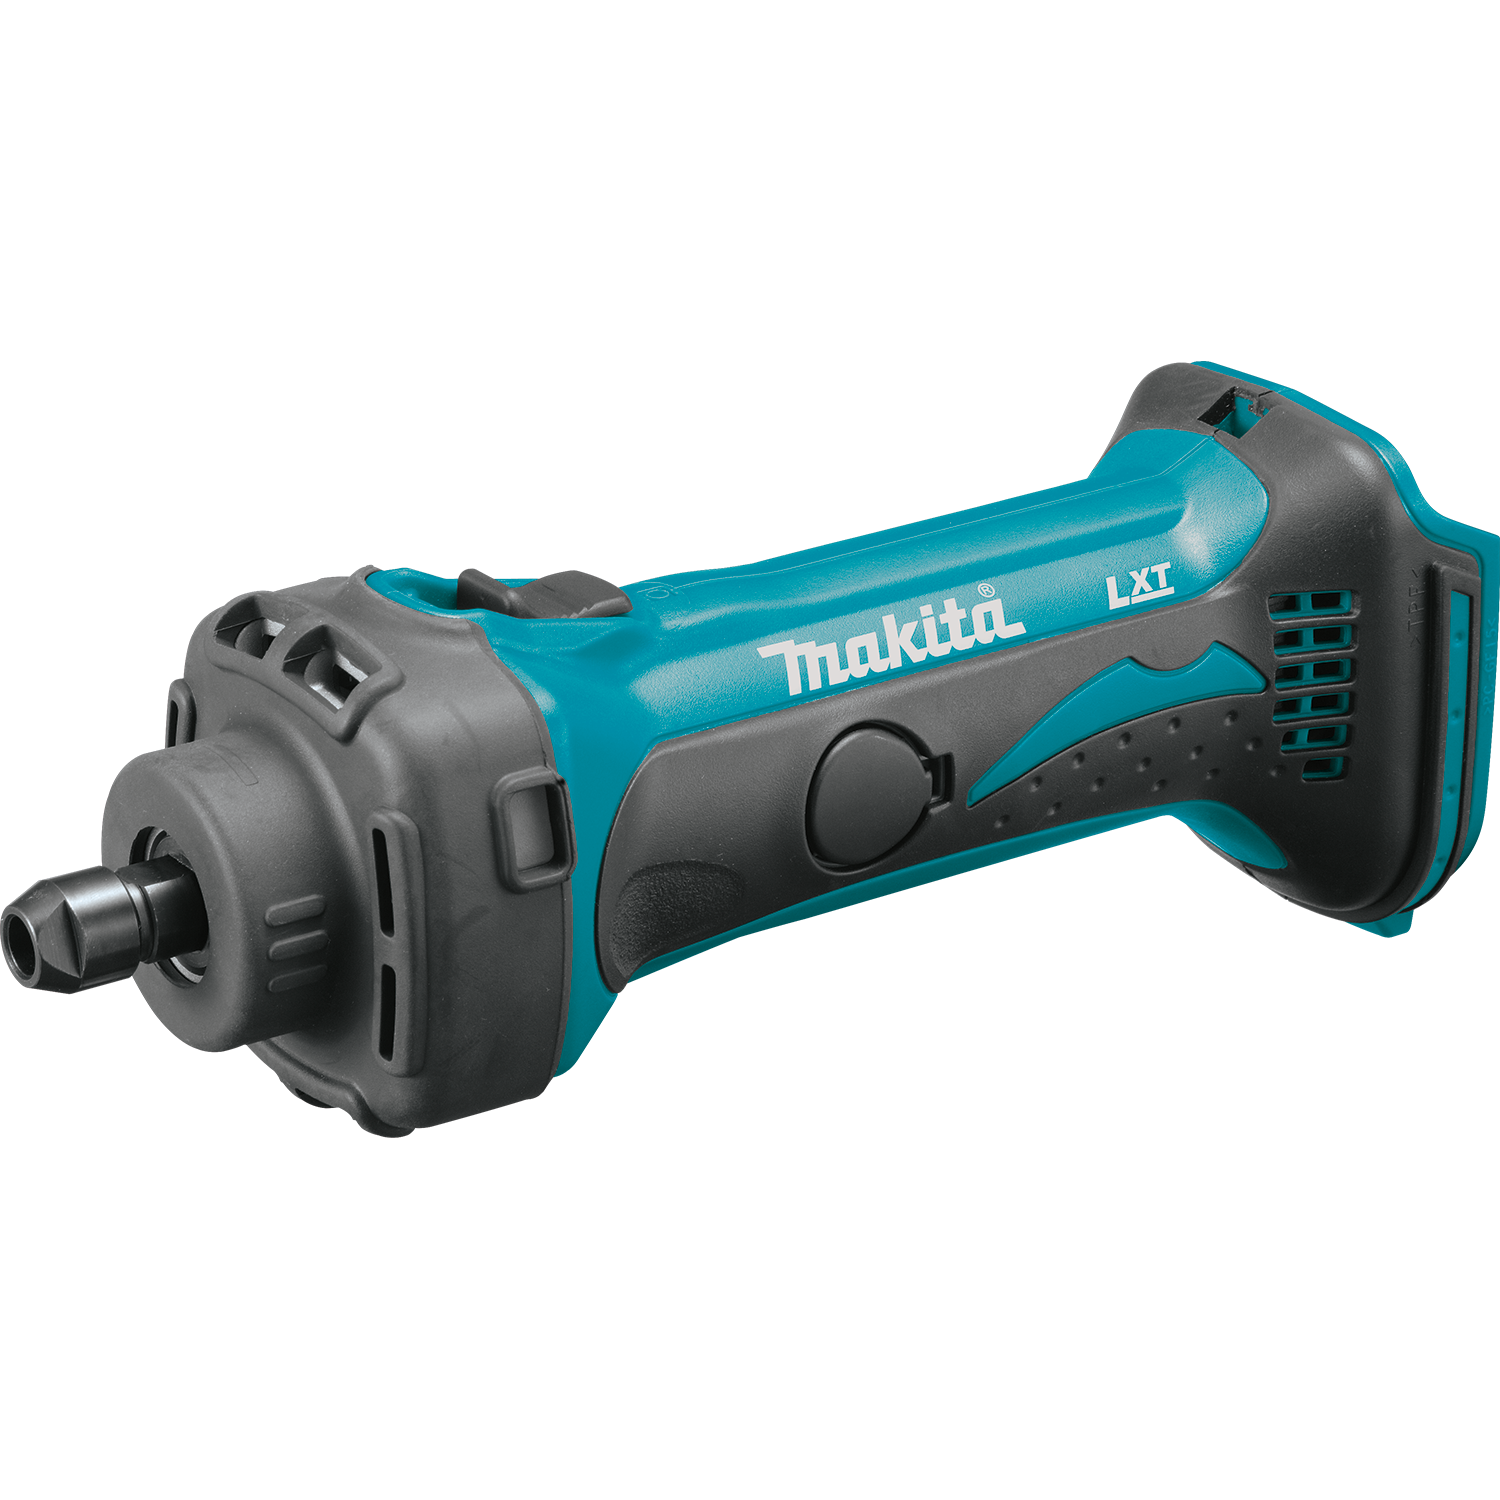 Makita XDG02Z 18V LXT Cordless 1/4 in. Compact Die Grinder, Tool Only,